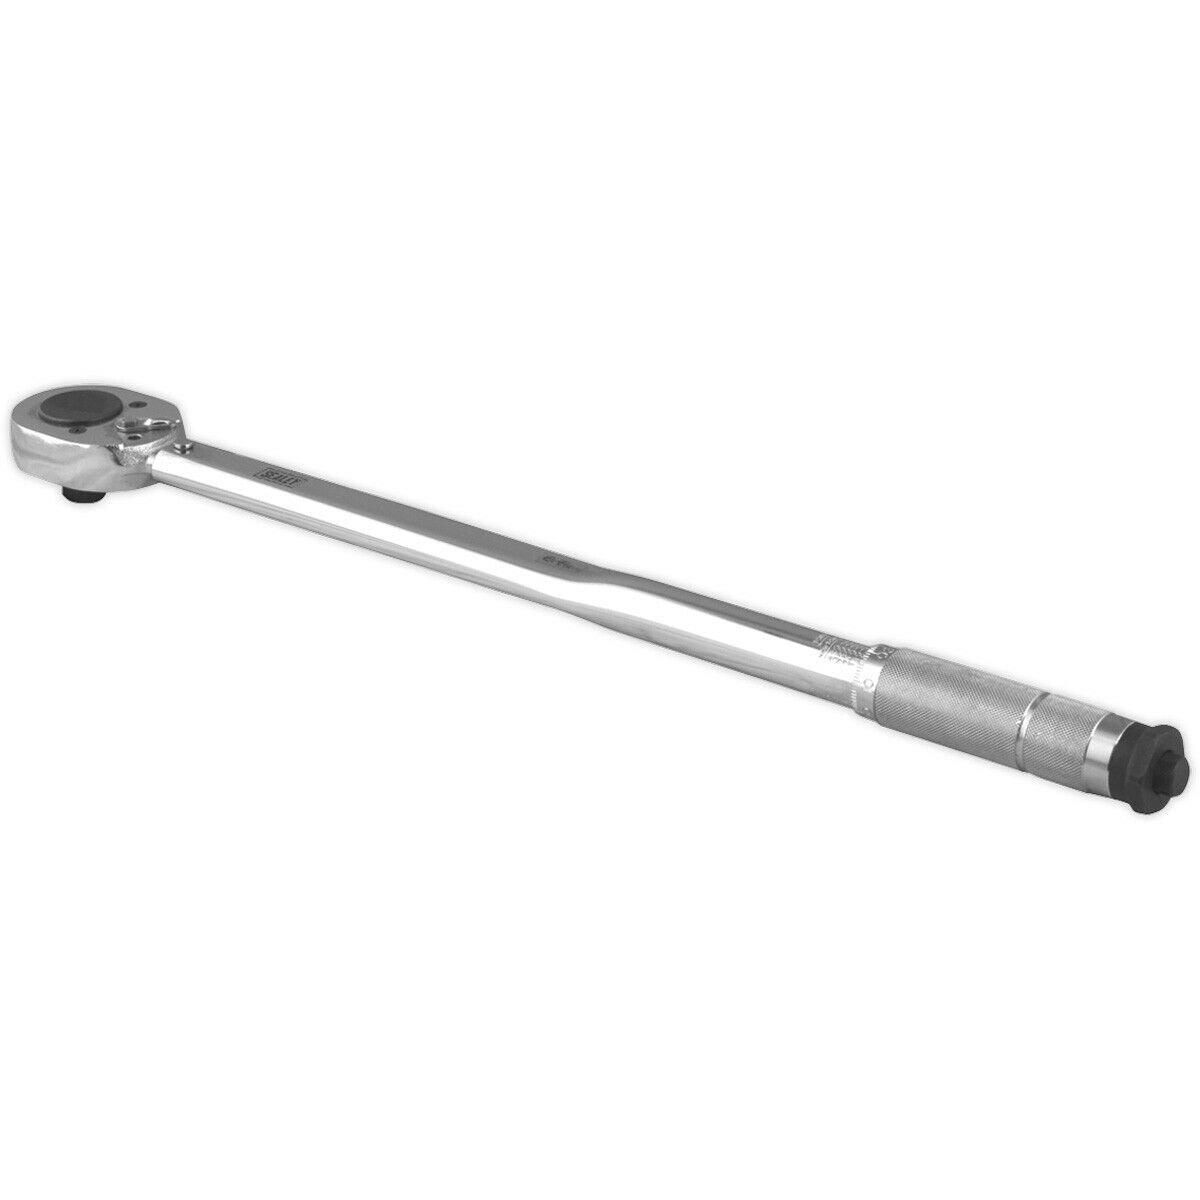 Micrometer Torque Wrench - 3/4